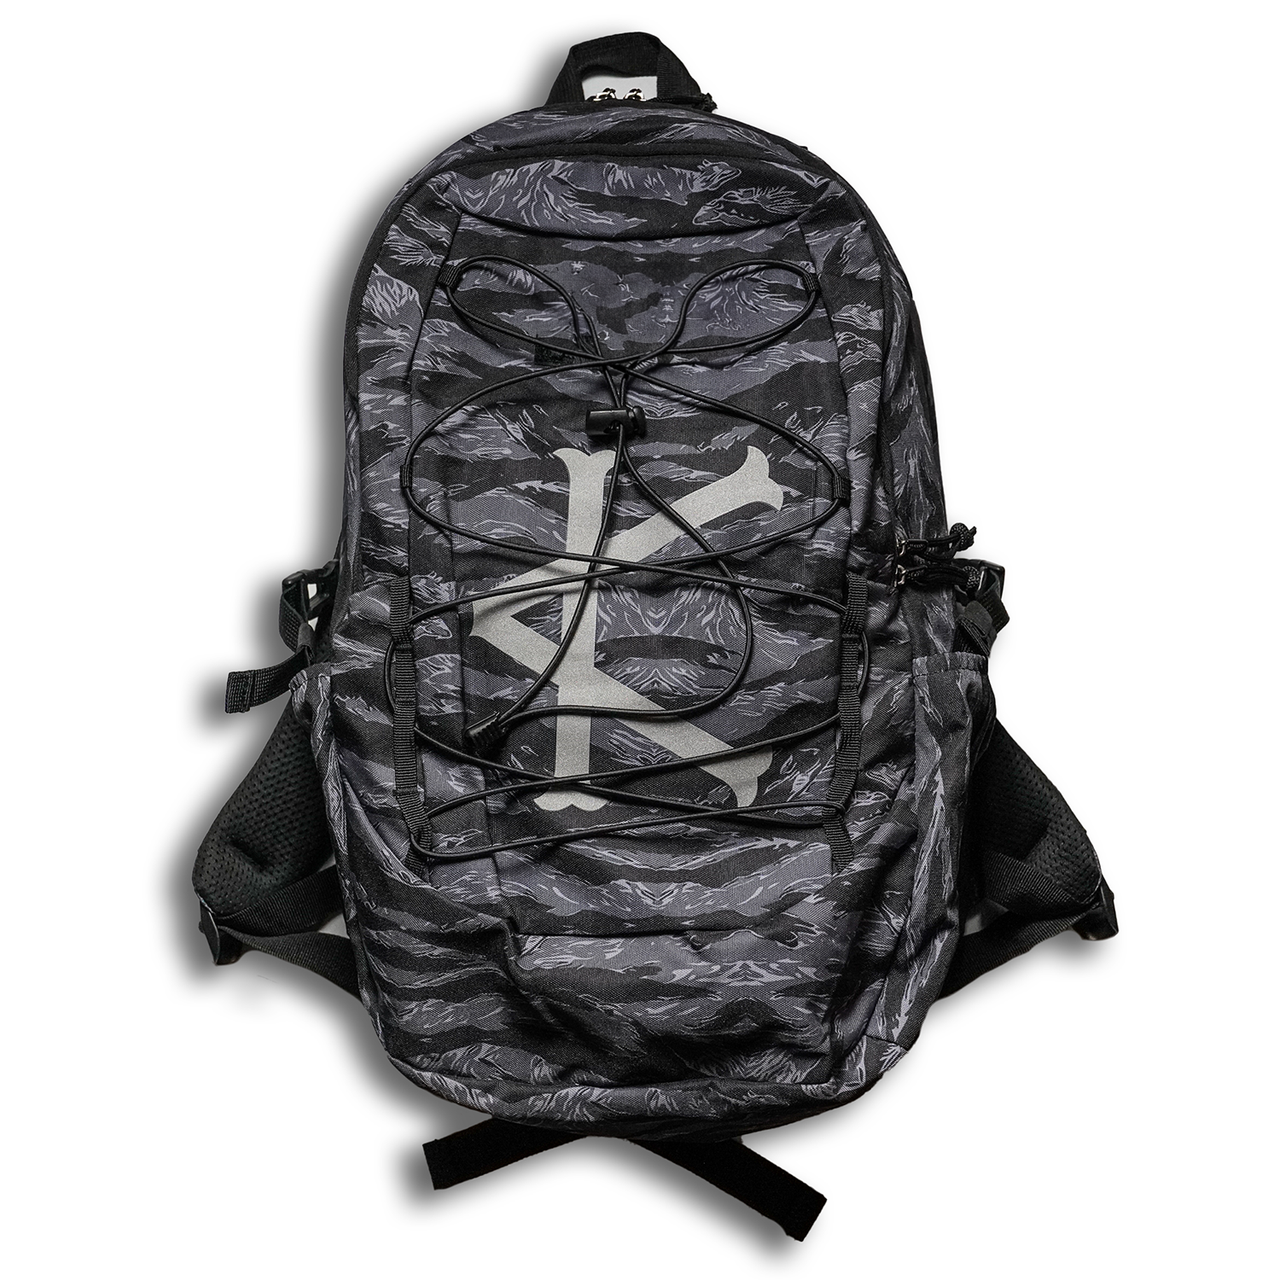 Tiger Camo Utility Backpack